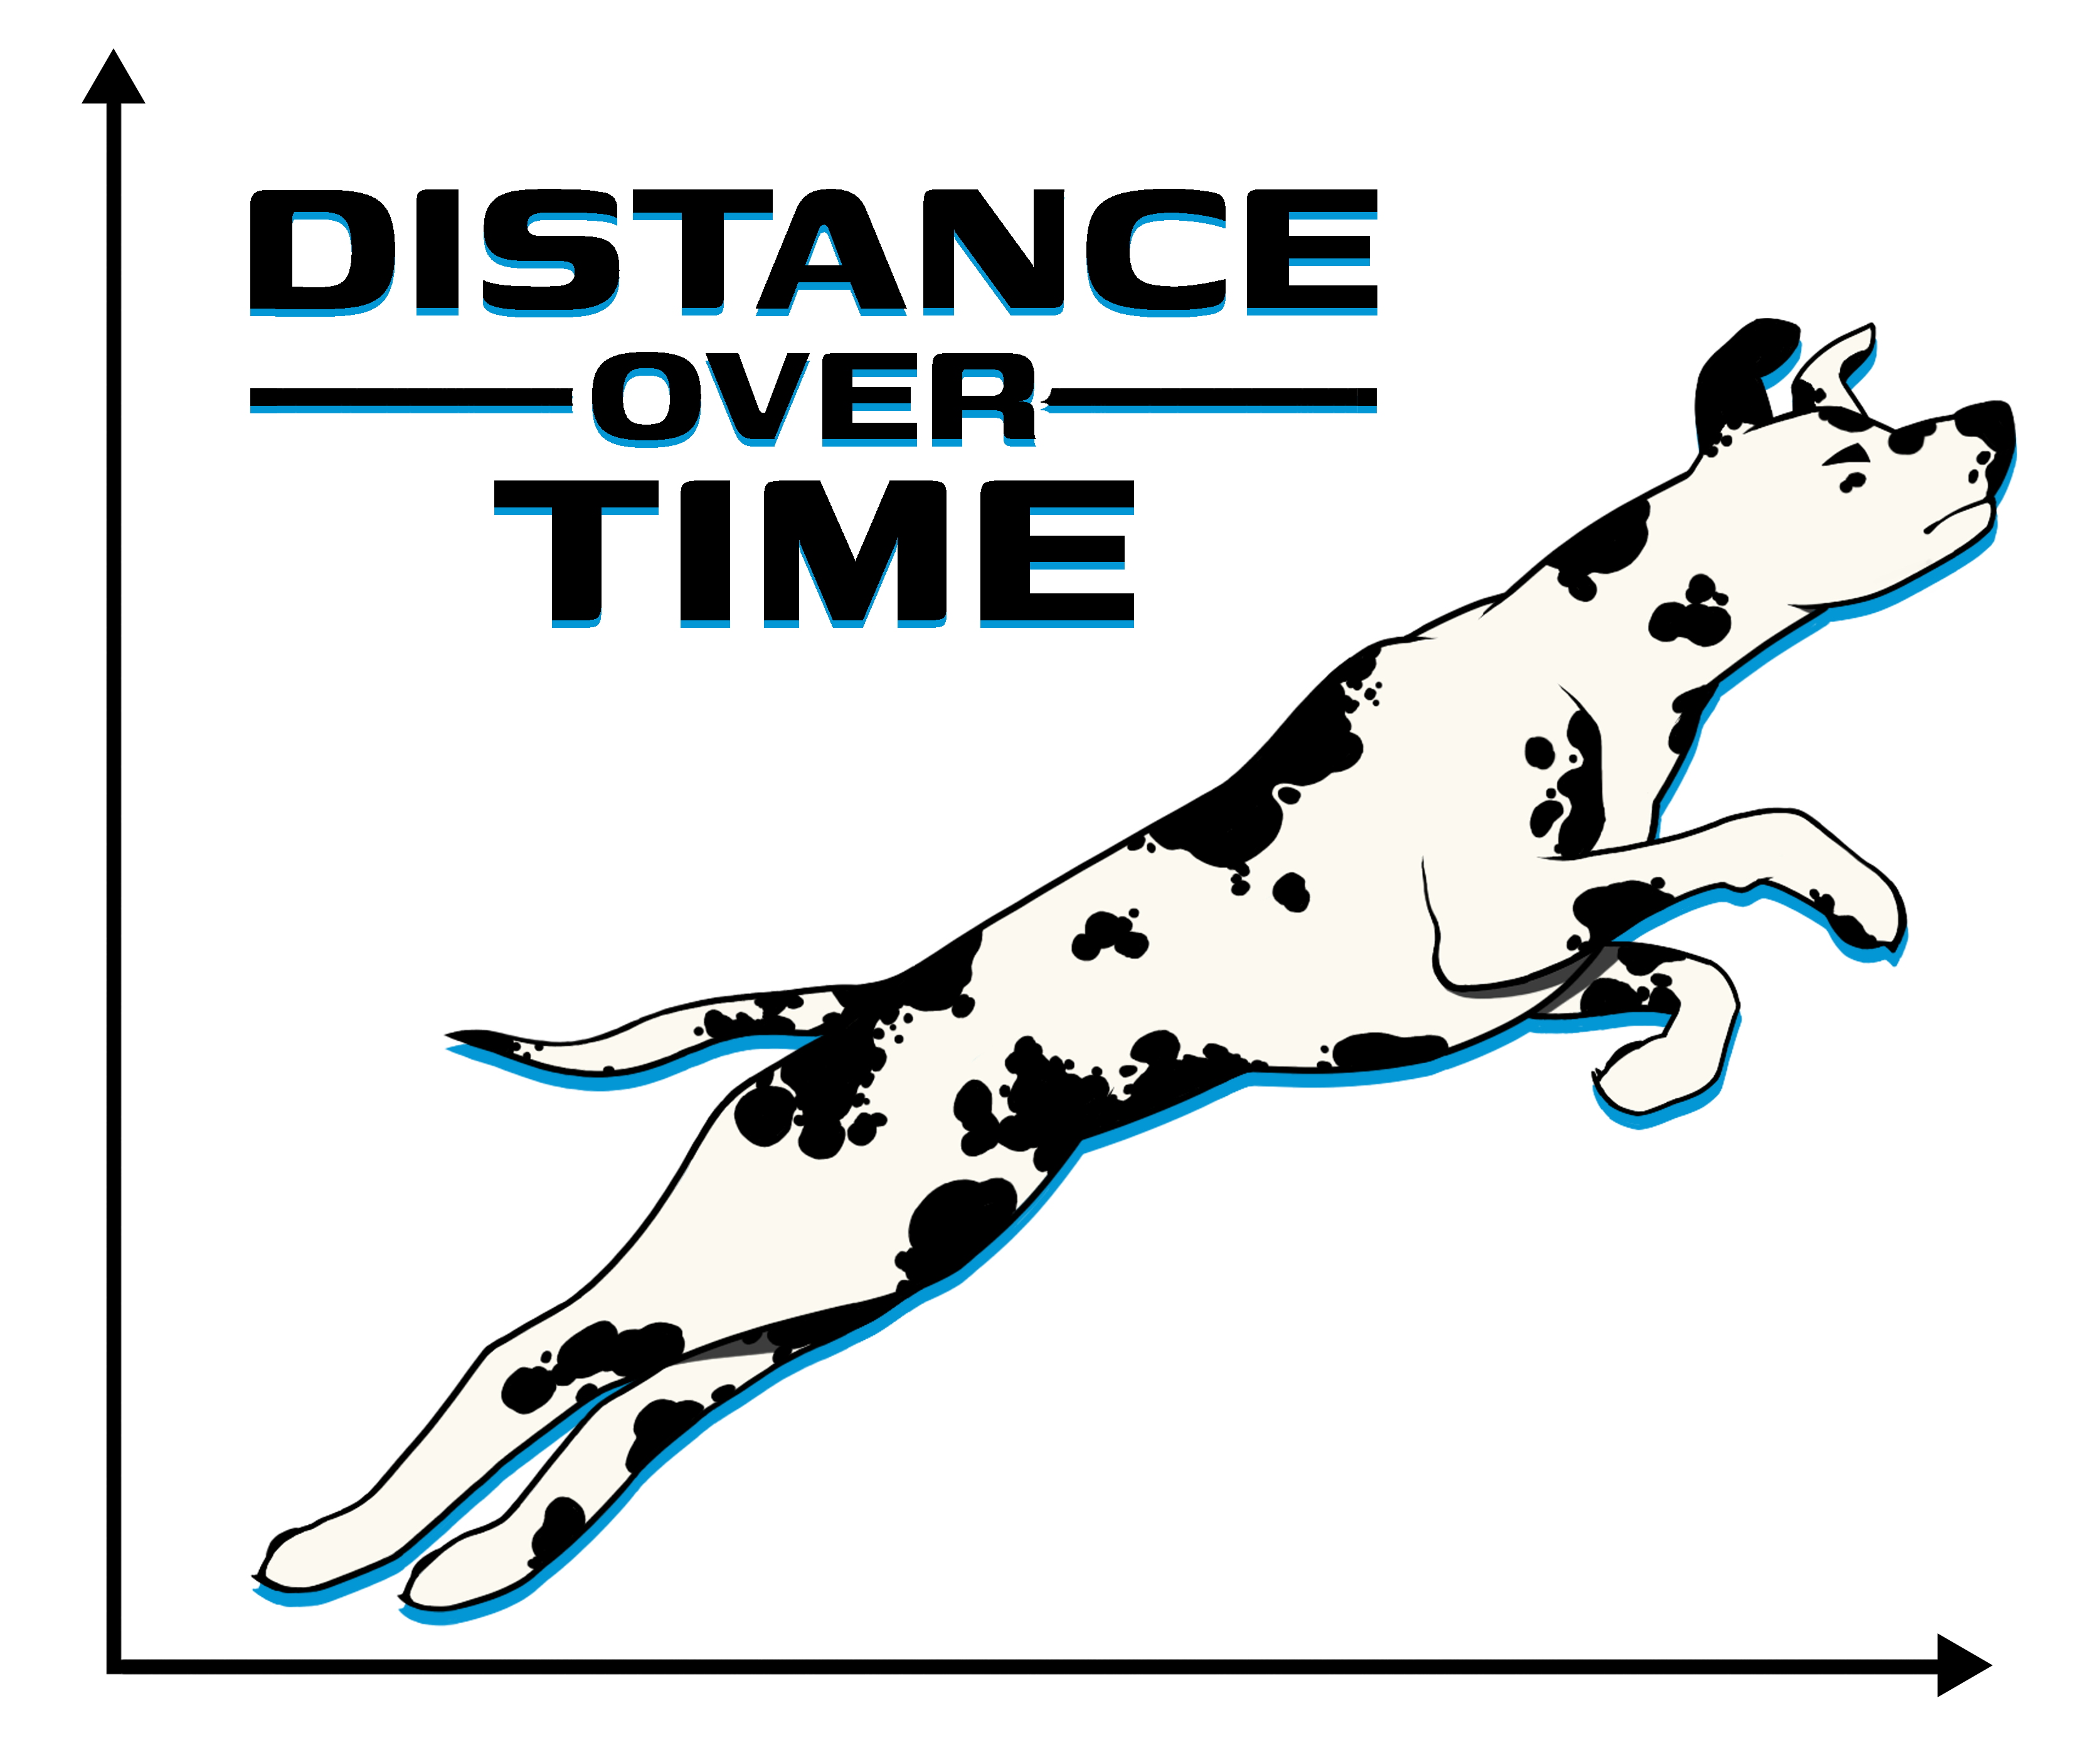 The studio logo shows 2 black arrows, one pointing upwards and one pointing right, depicting the X and Y axis of a graph. A black-and-white spotted dog jumps diagonally in the center of the graph. There is text reading 'Distance Over Time' positioned above the dog.